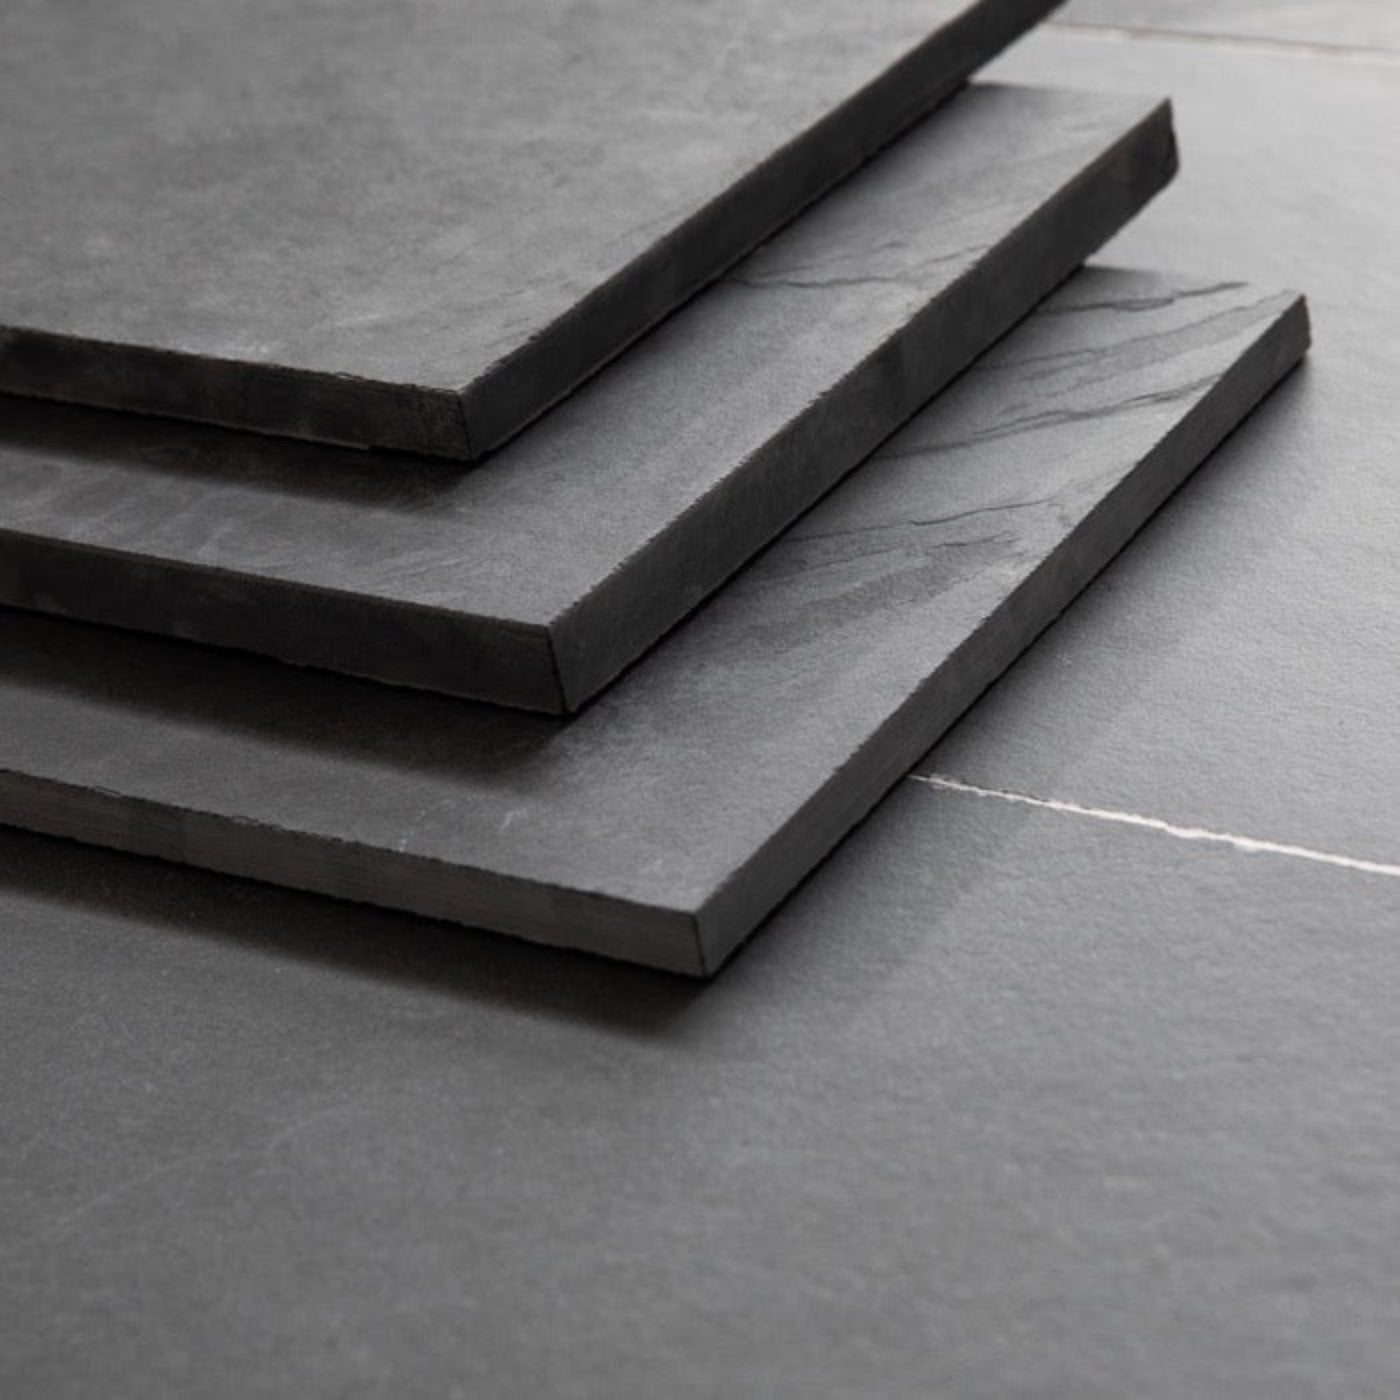 Black Slate Paving Slabs | 900 x 600 x 20 mm | As low as £34.78/m2 | Delivered